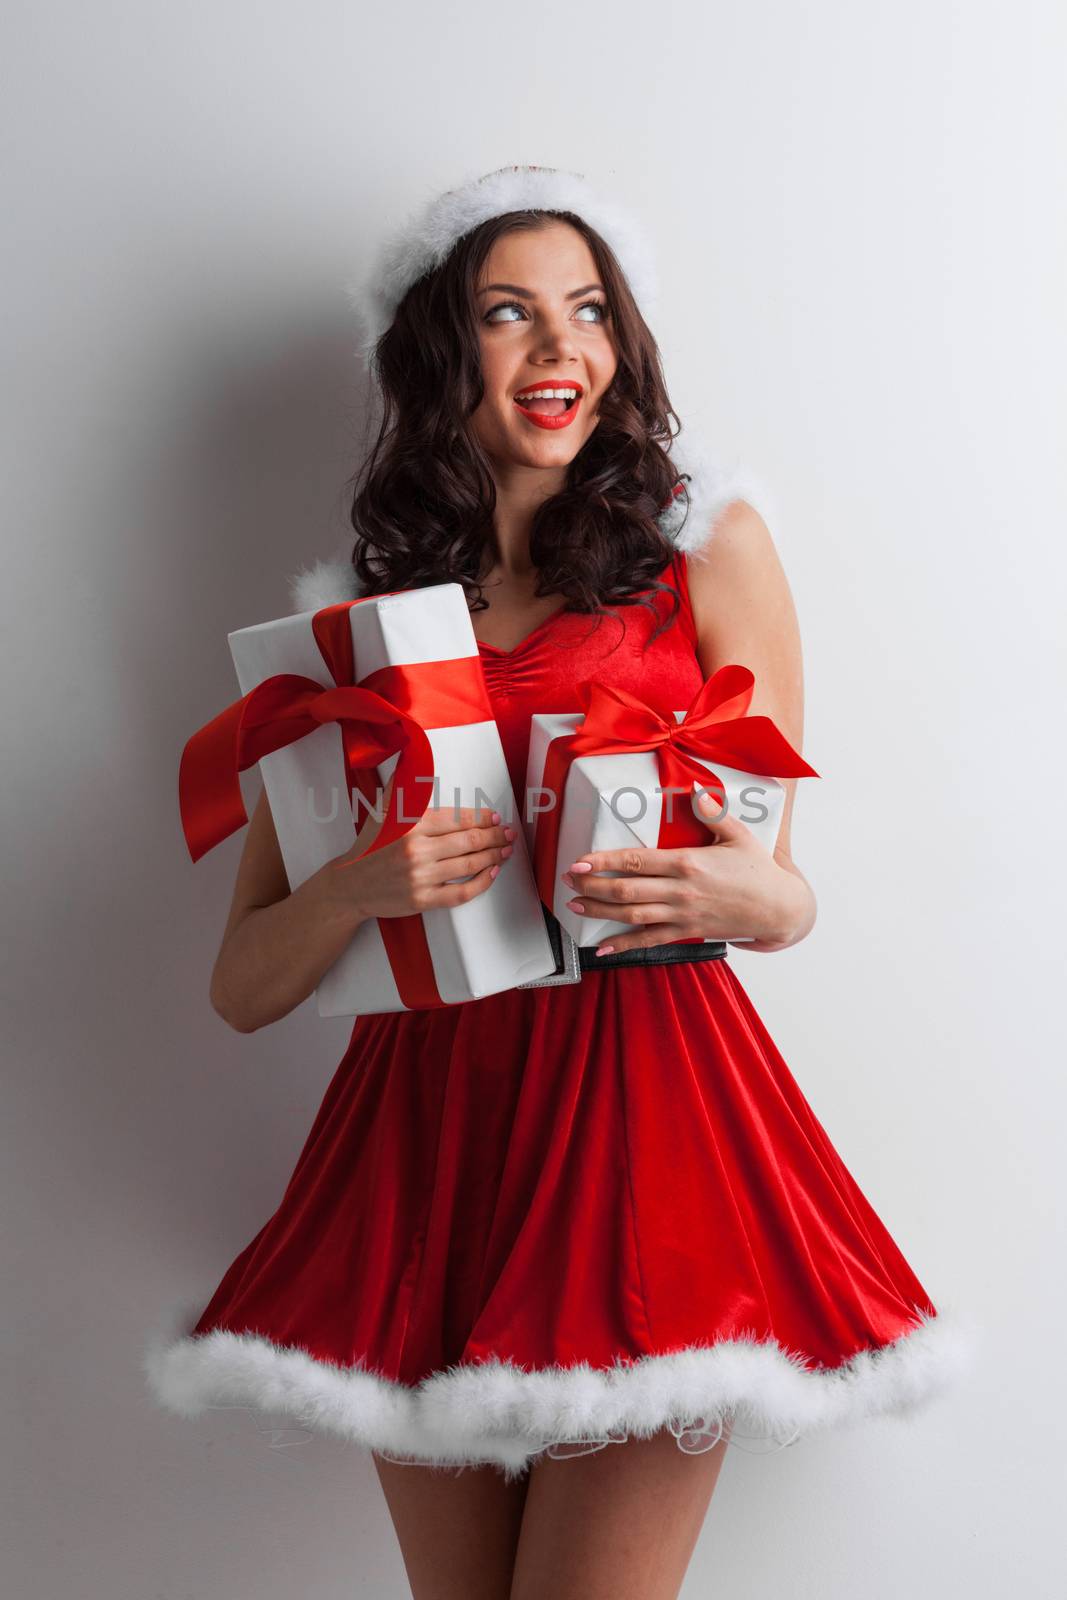 Excited surprised woman in red santa claus outfit holding Christmas presents